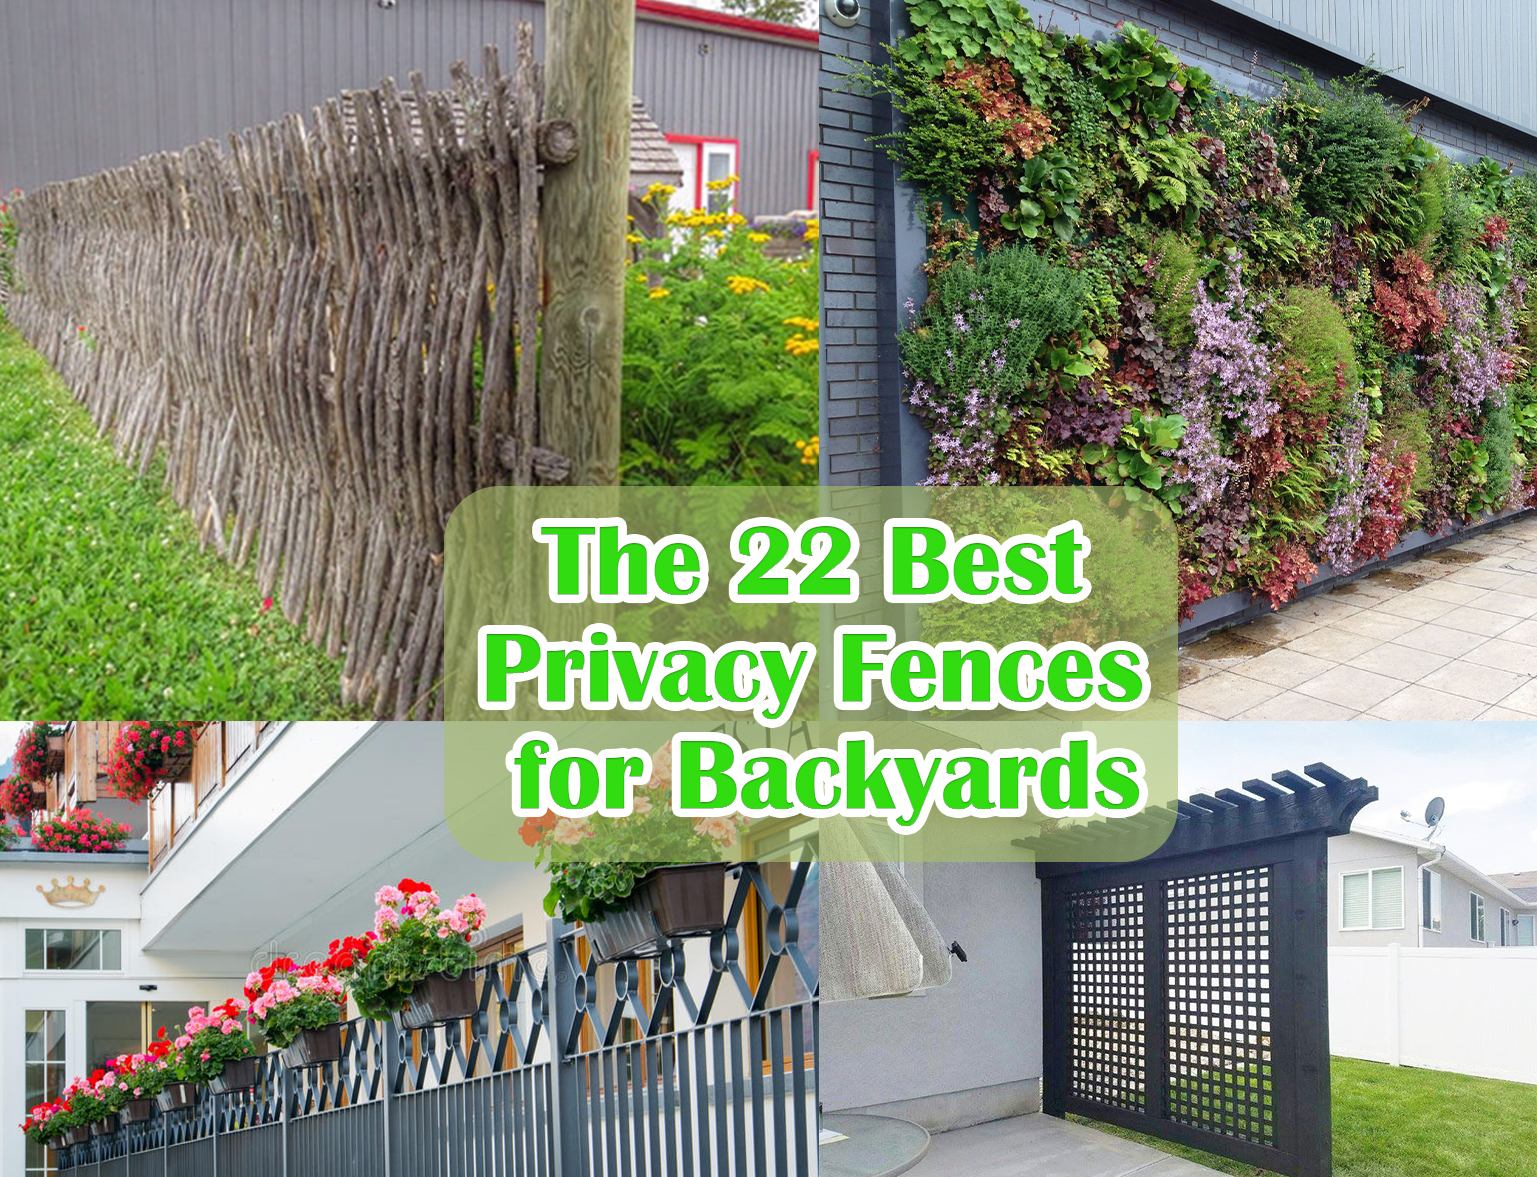 The 22 Best Privacy Fences for Backyards